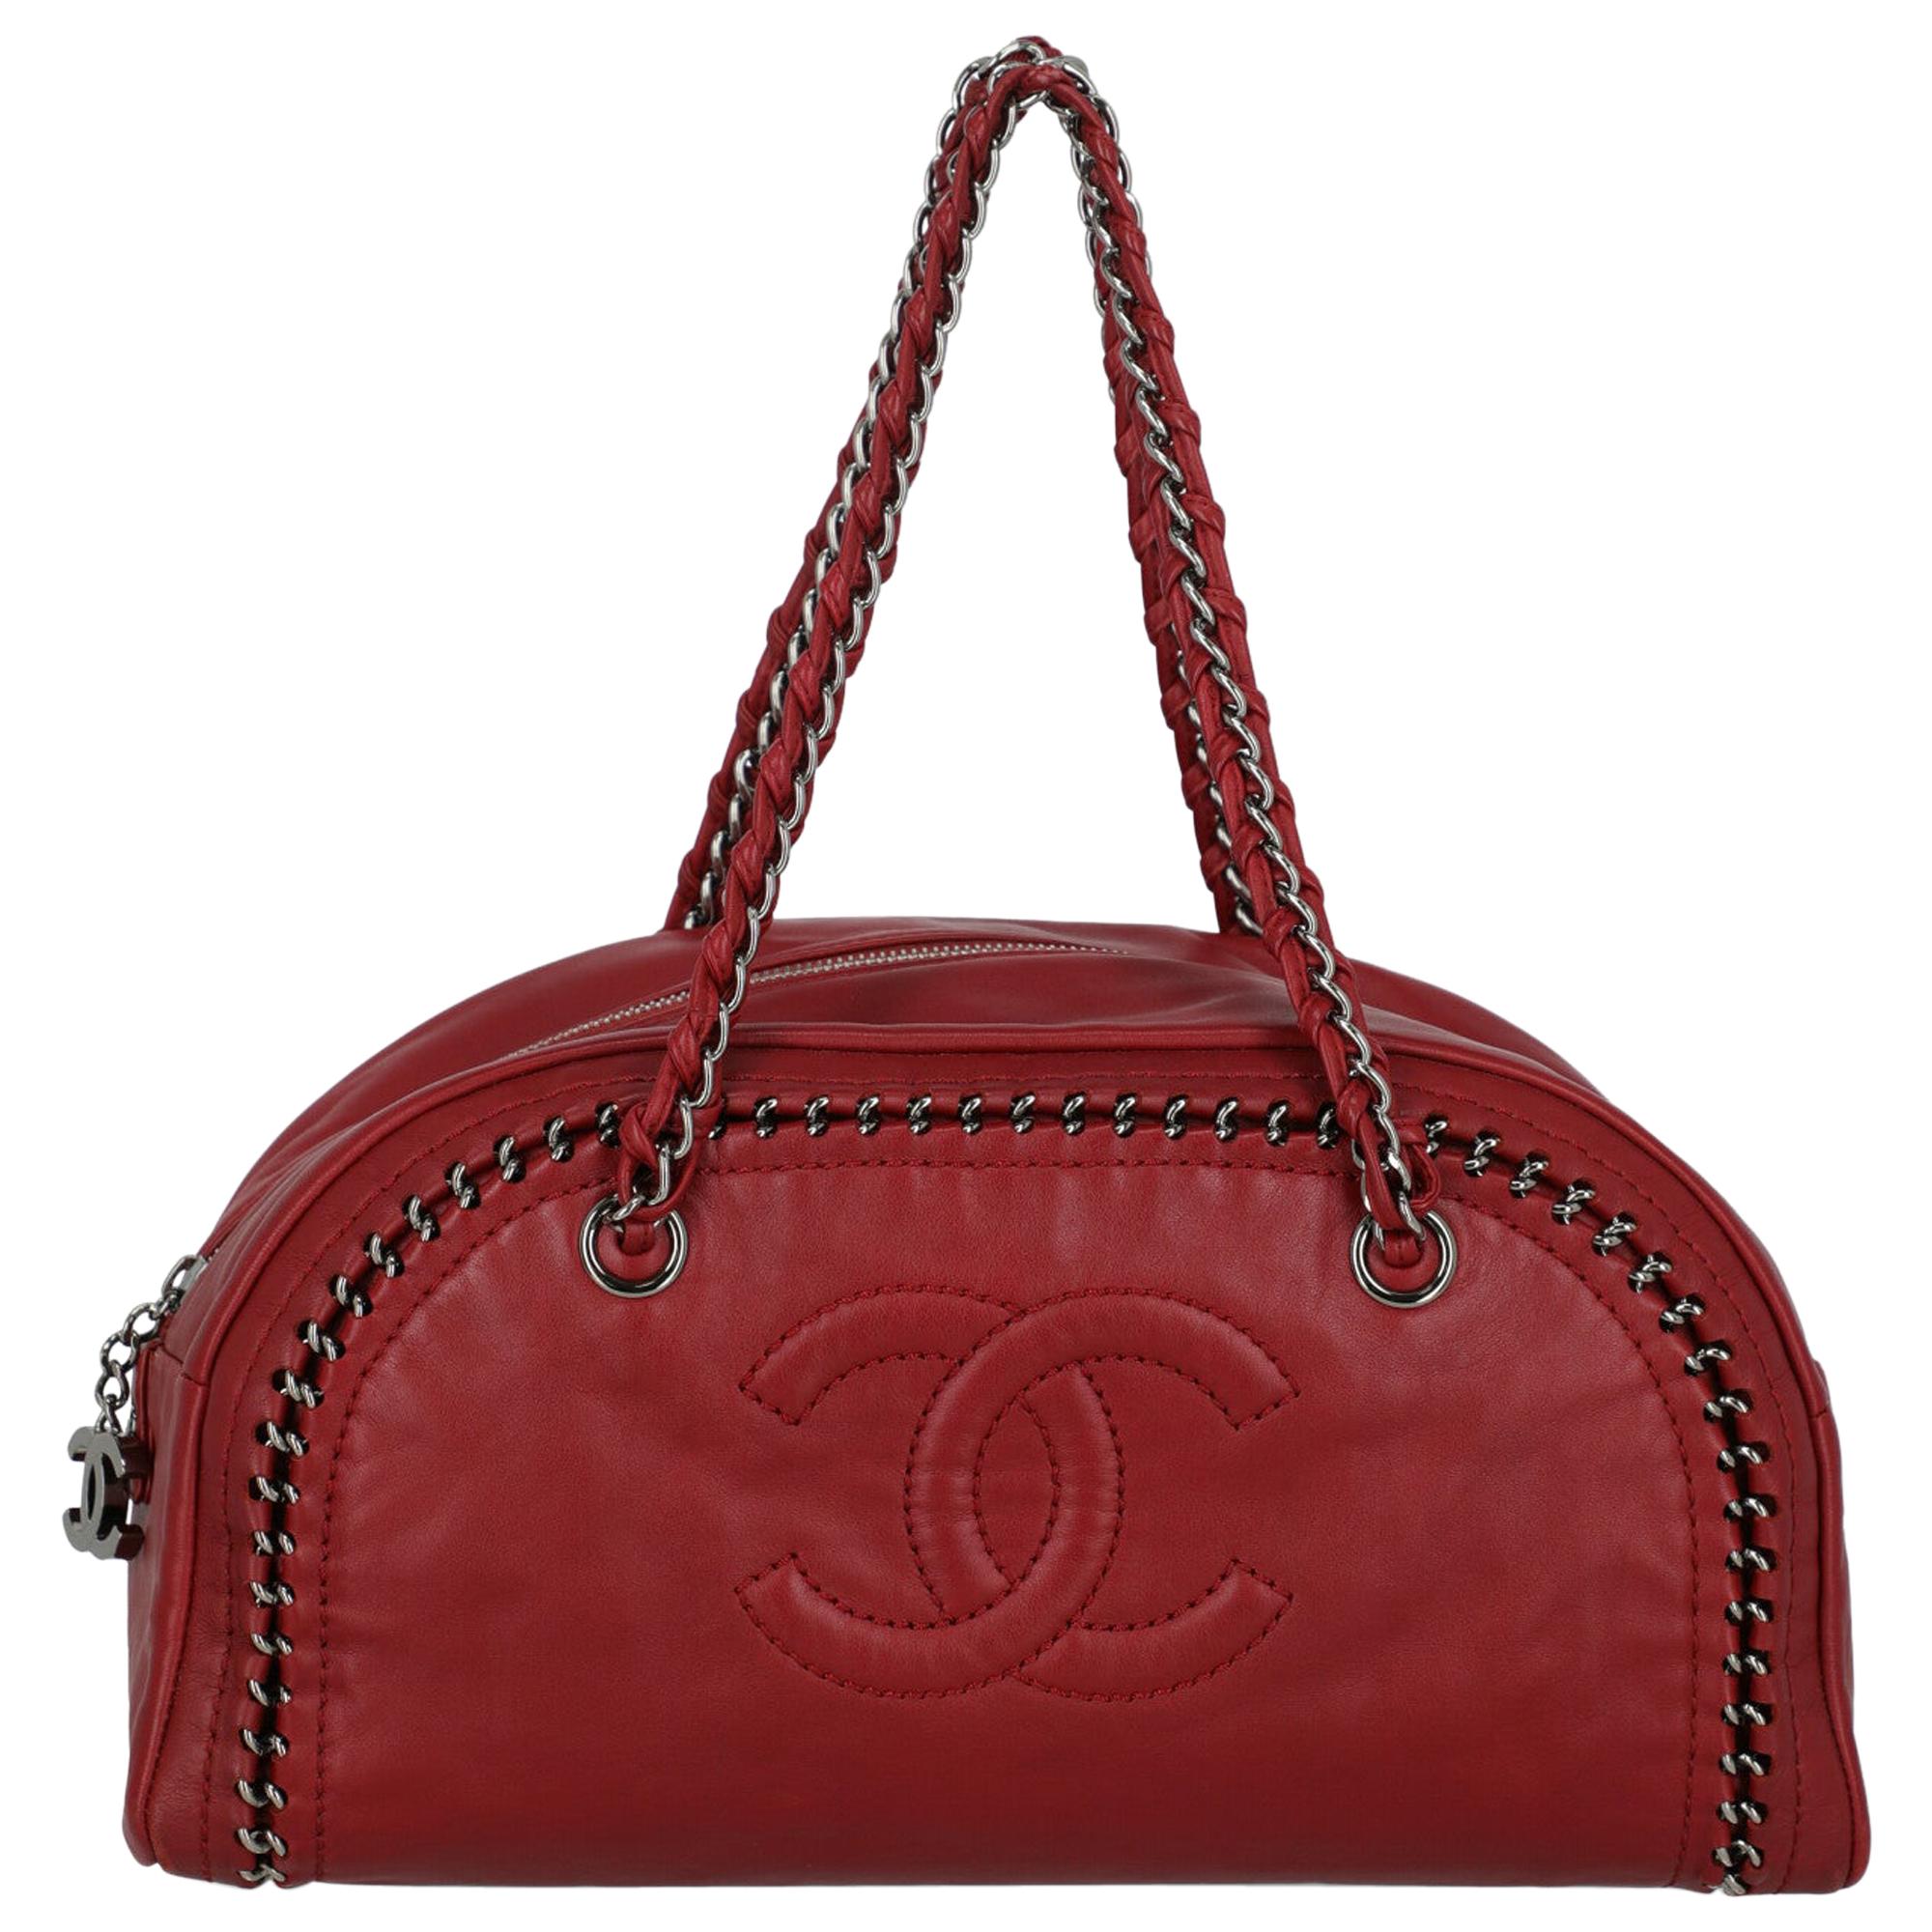 Chanel Women's Handbag Red Leather For Sale